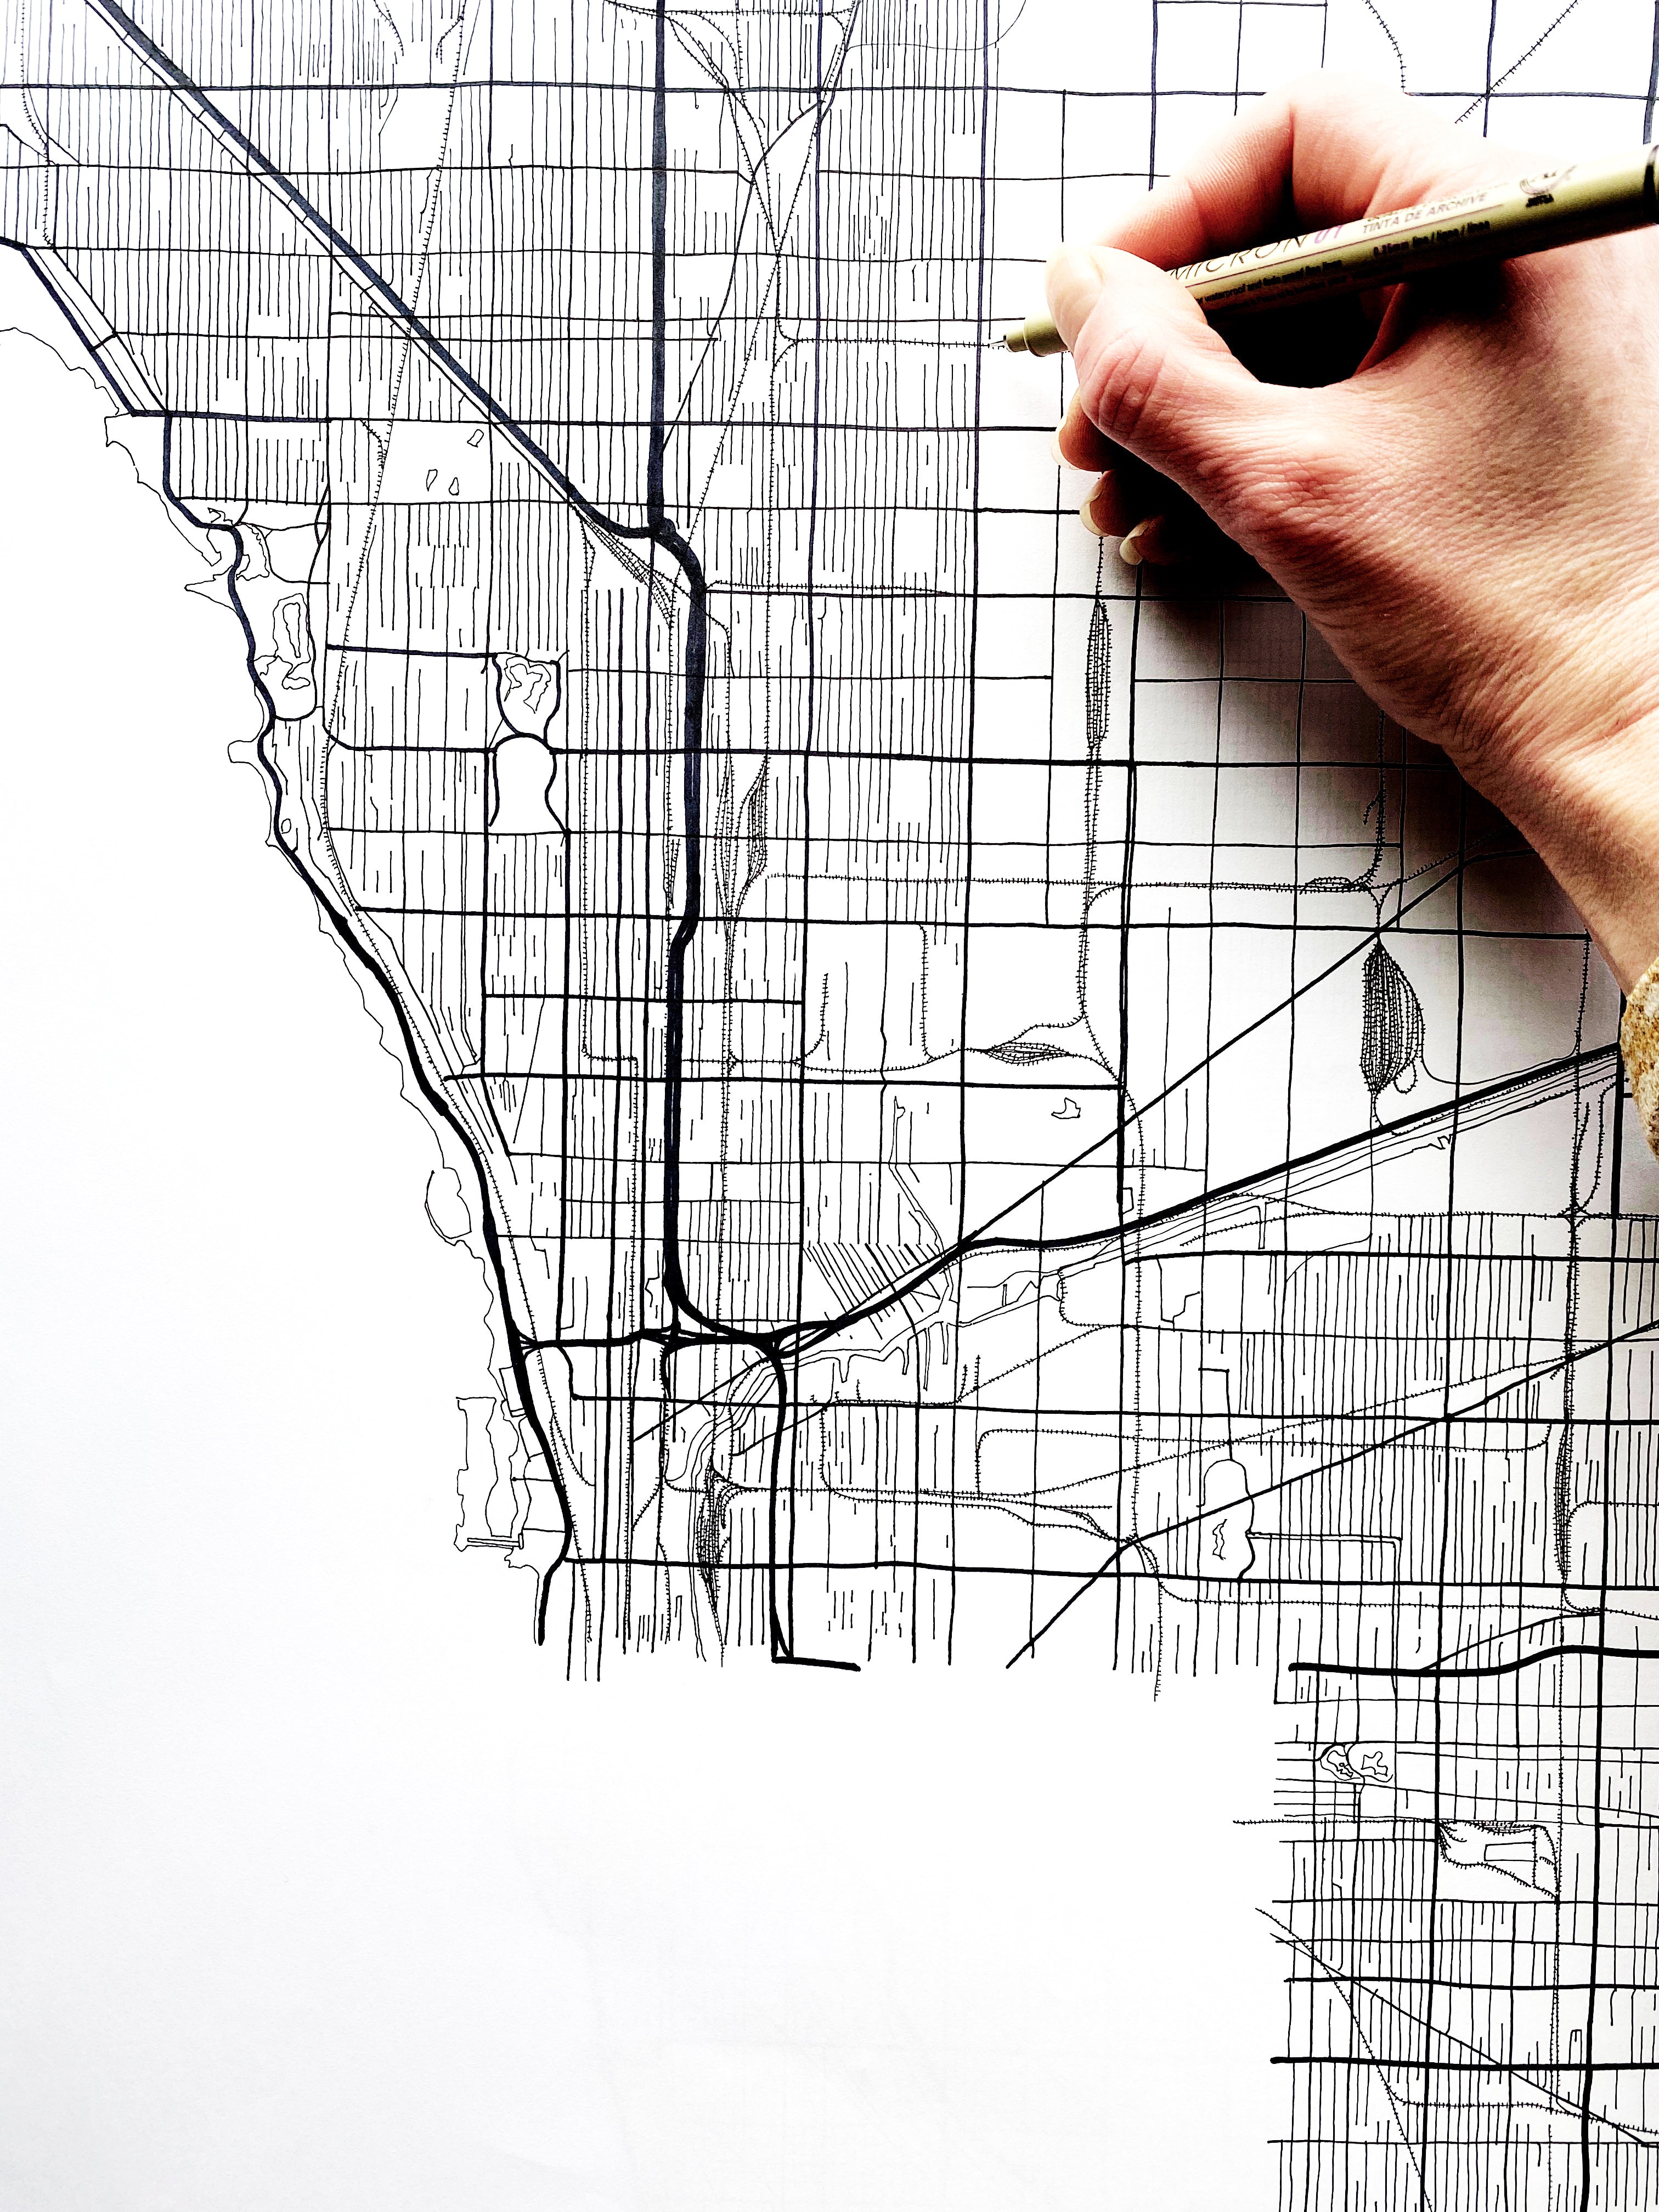 Greater CHICAGO City Lines Map: PRINT